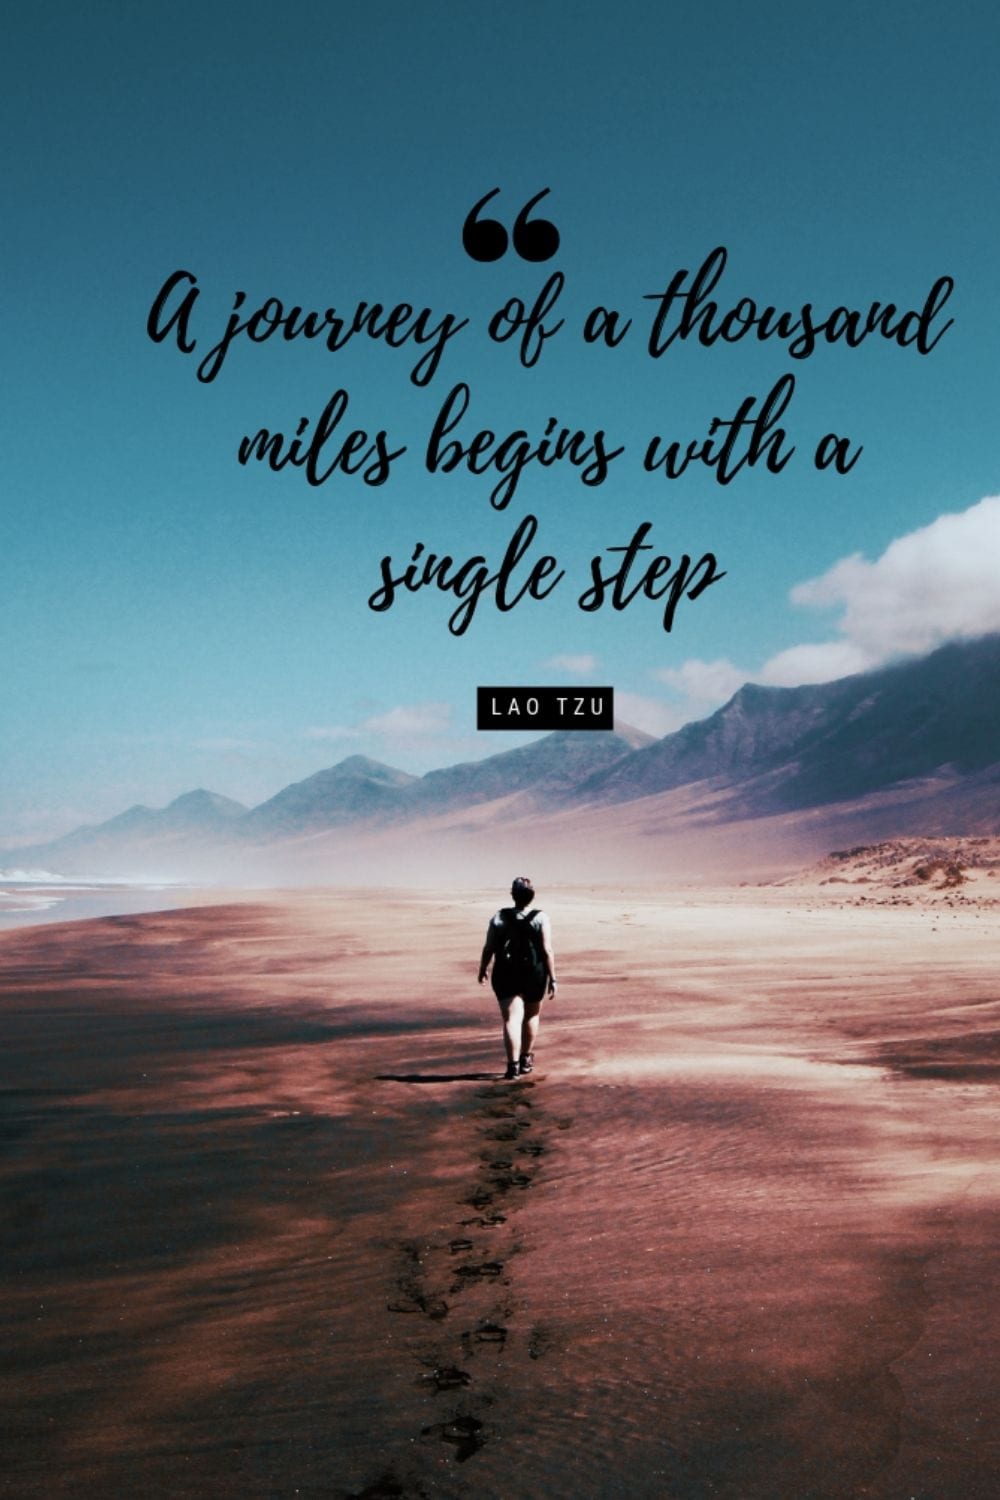 inspirational meaningful life journey quotes